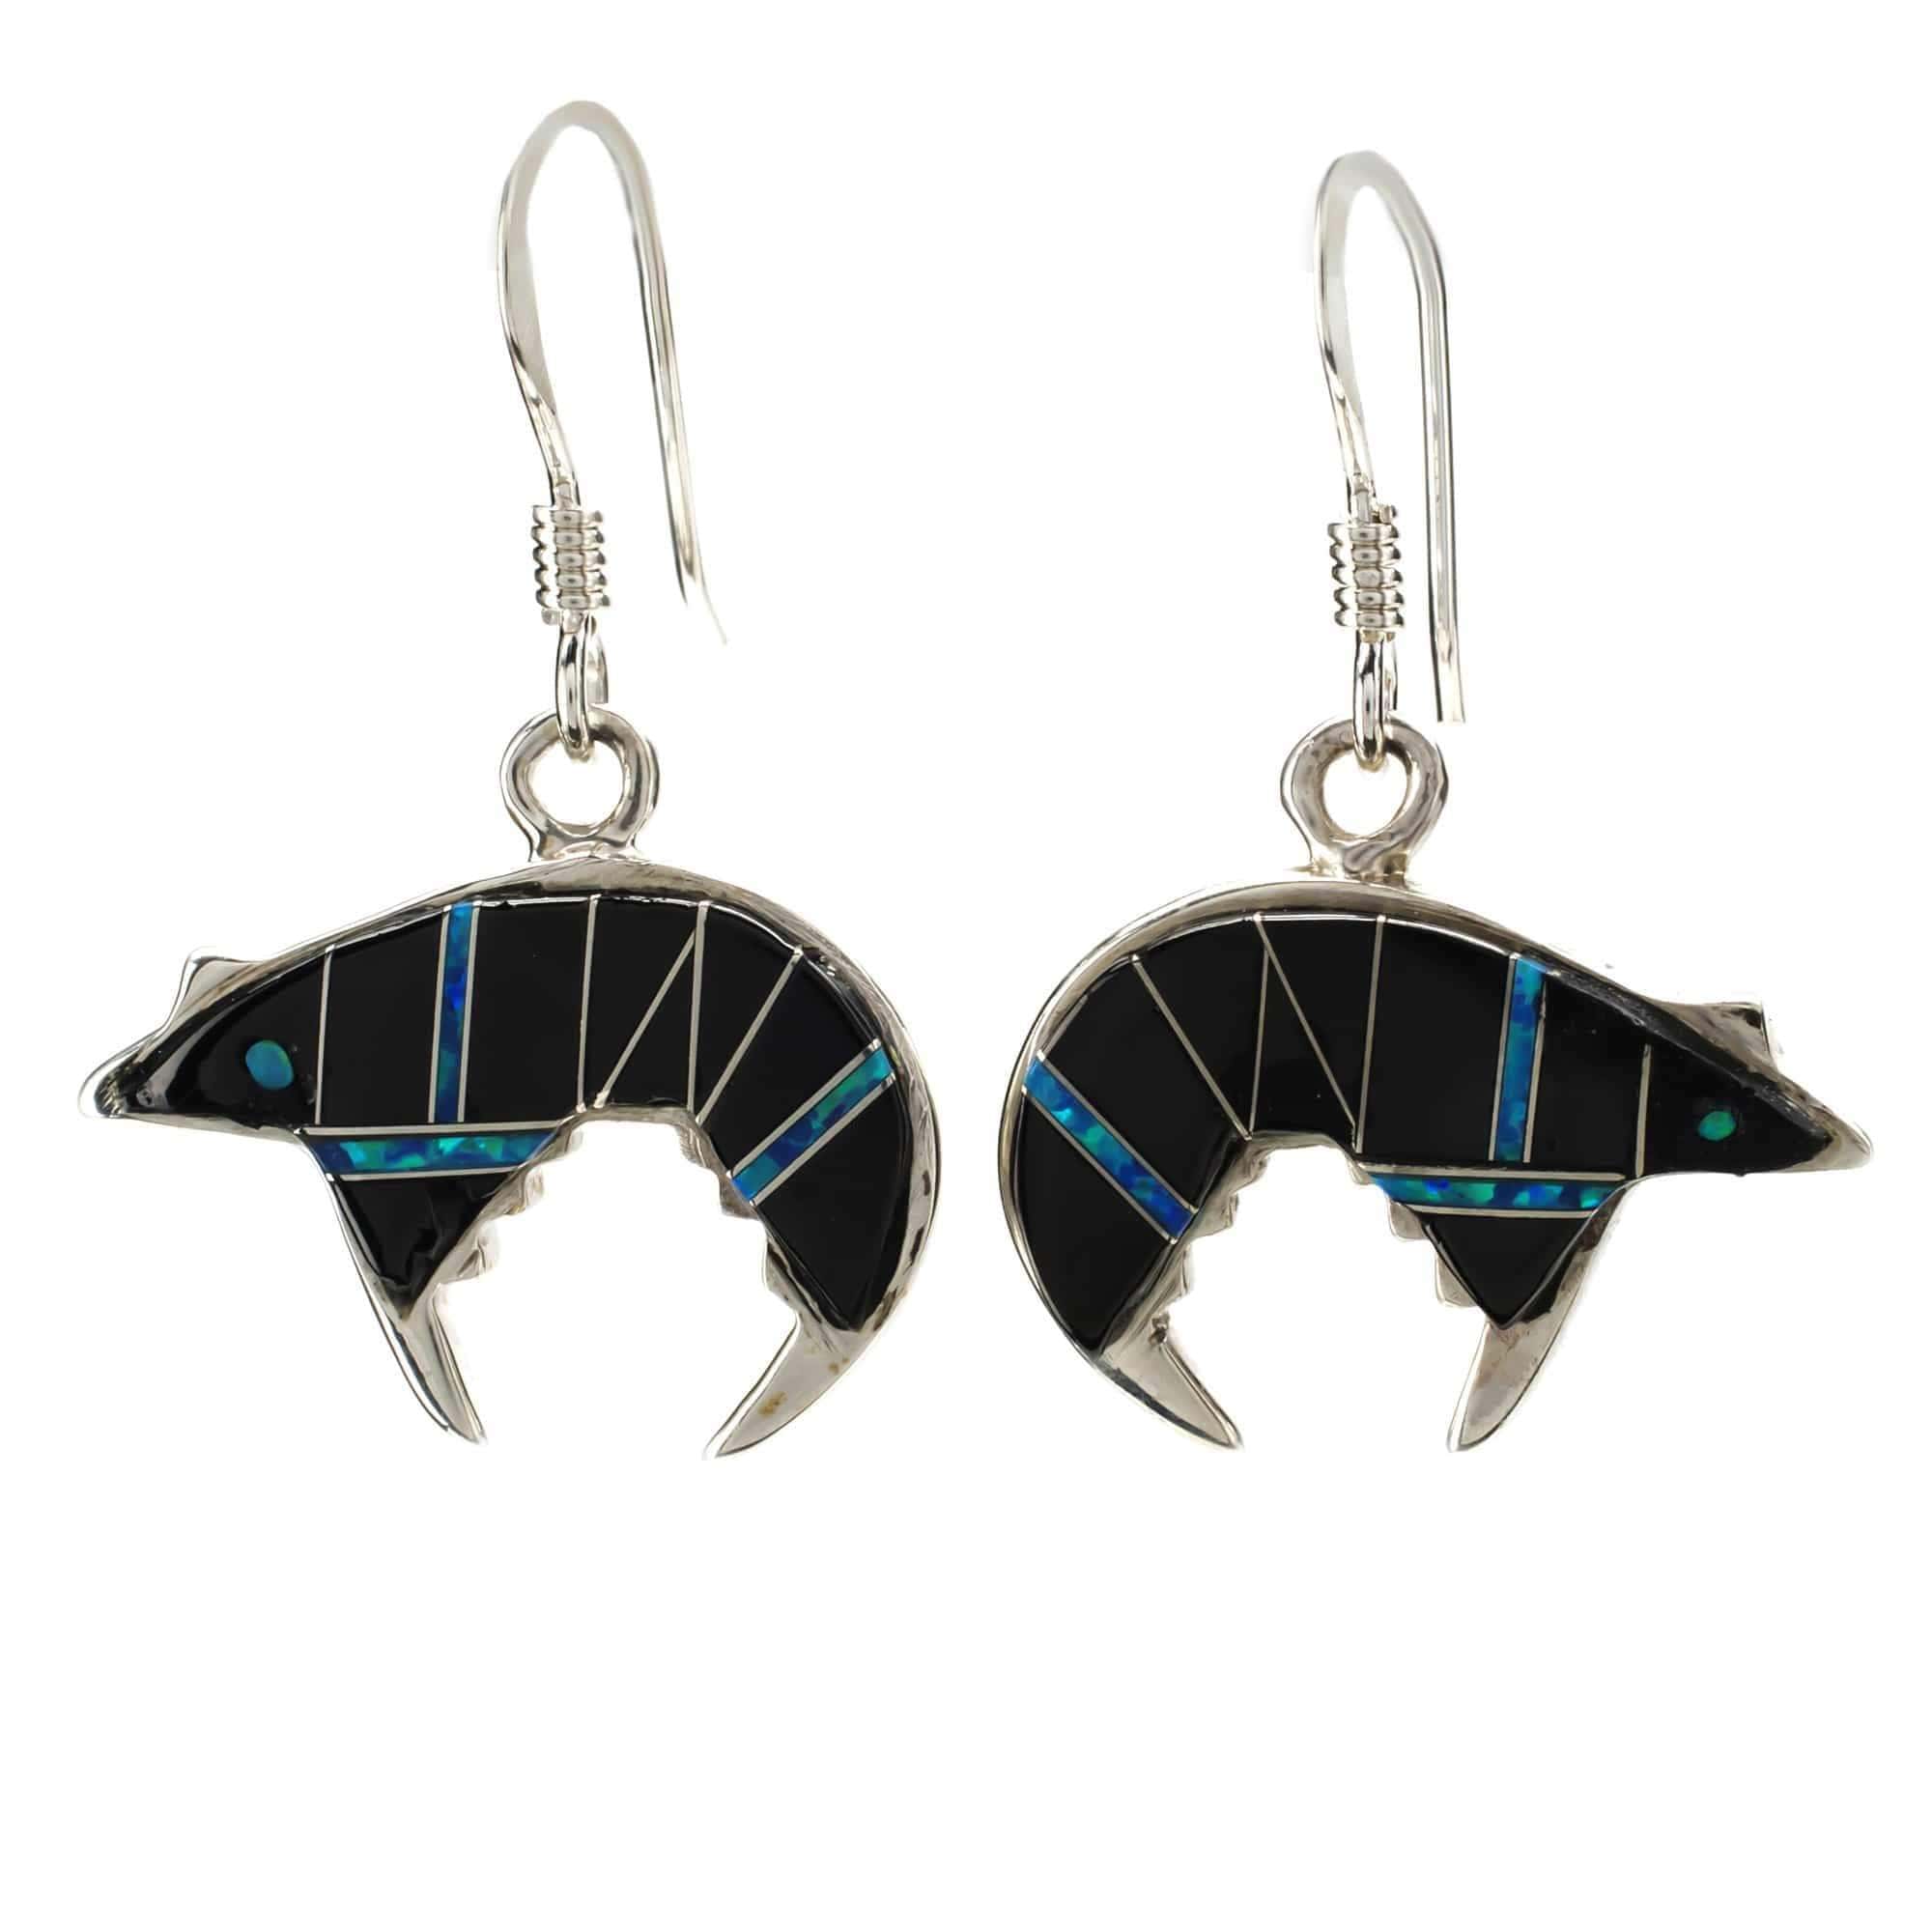 Kalifano Southwest Silver Jewelry Black Onyx Bear 925 Sterling Silver Earring with French Hook USA Handmade with Aqua Opal Accent NME.0755.BO